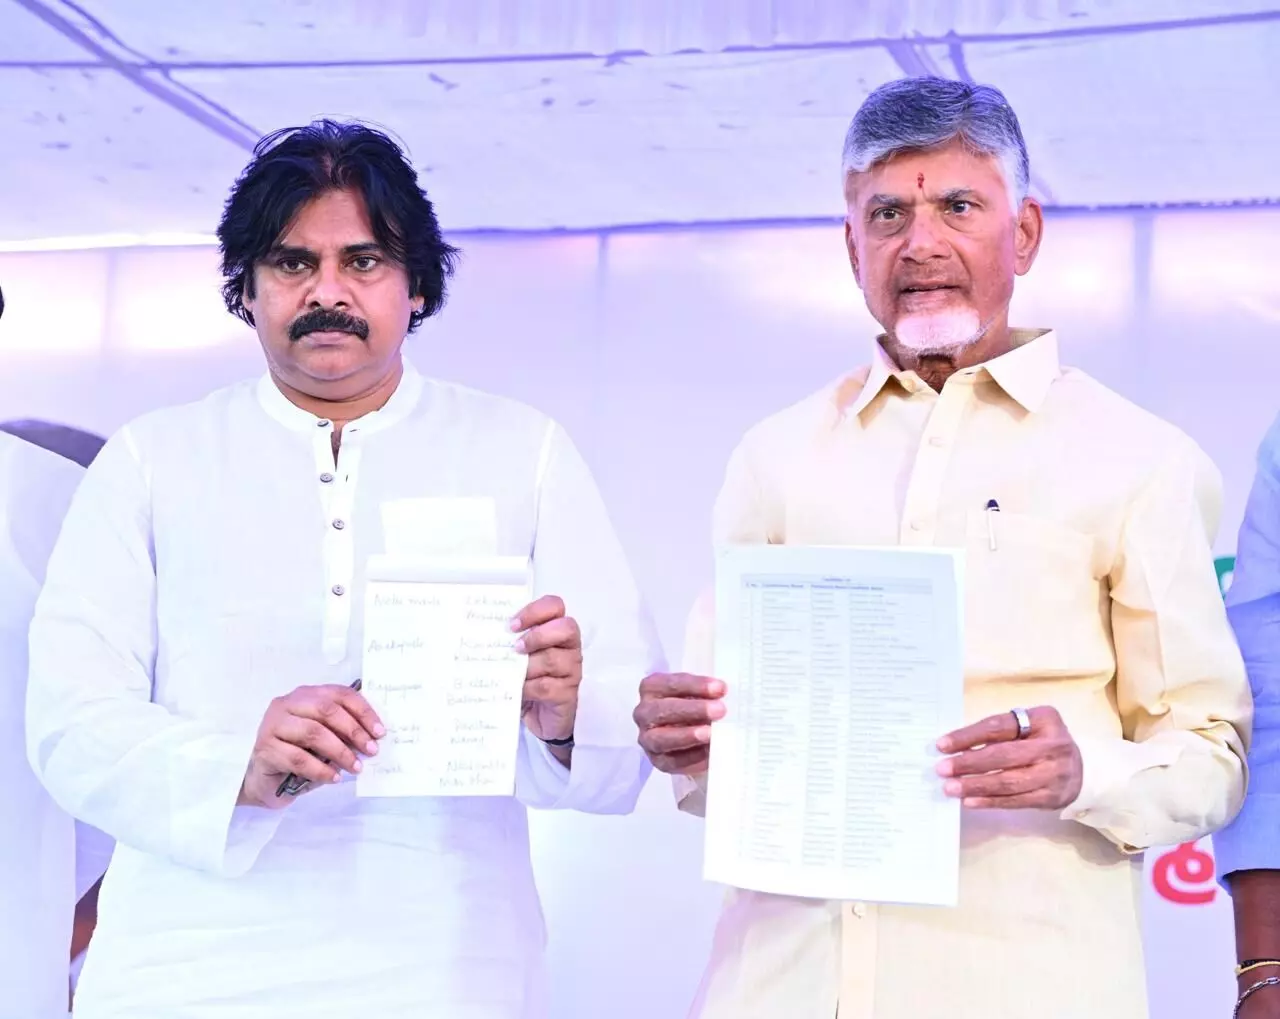 TDP never fielded at least one Brahmin in Assembly elections since 2014 in contrast to YSRCP which always had one or more